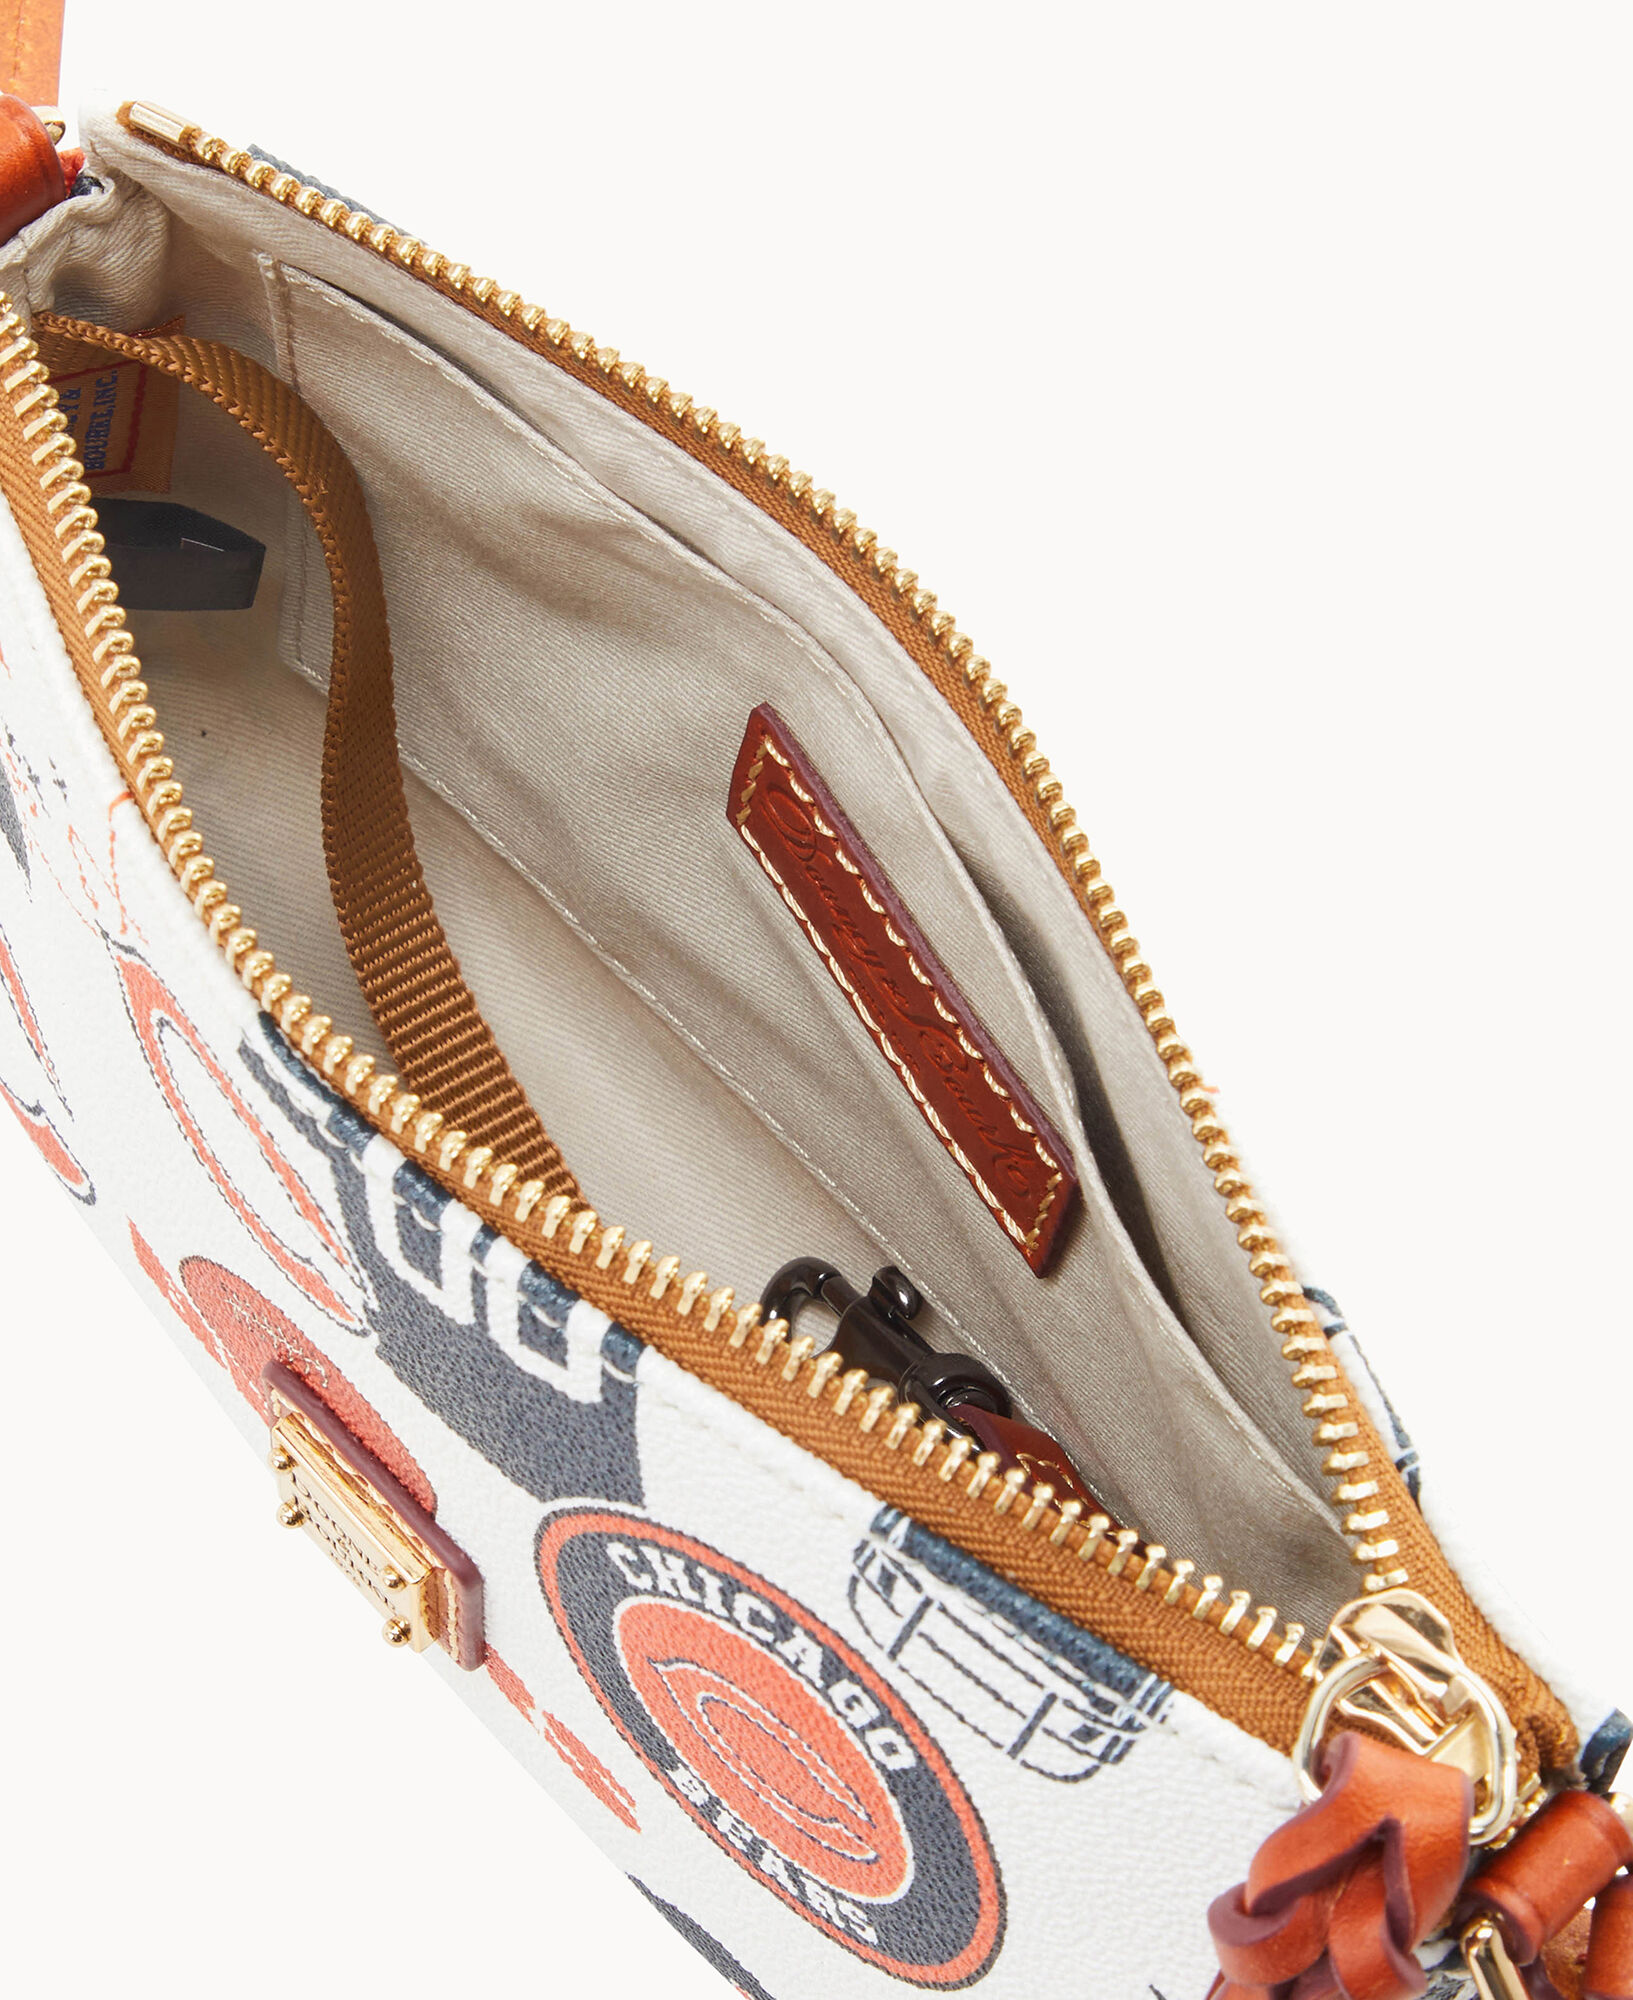 Women's Dooney & Bourke Chicago Bears Gameday Lexi Crossbody with Small  Coin Case